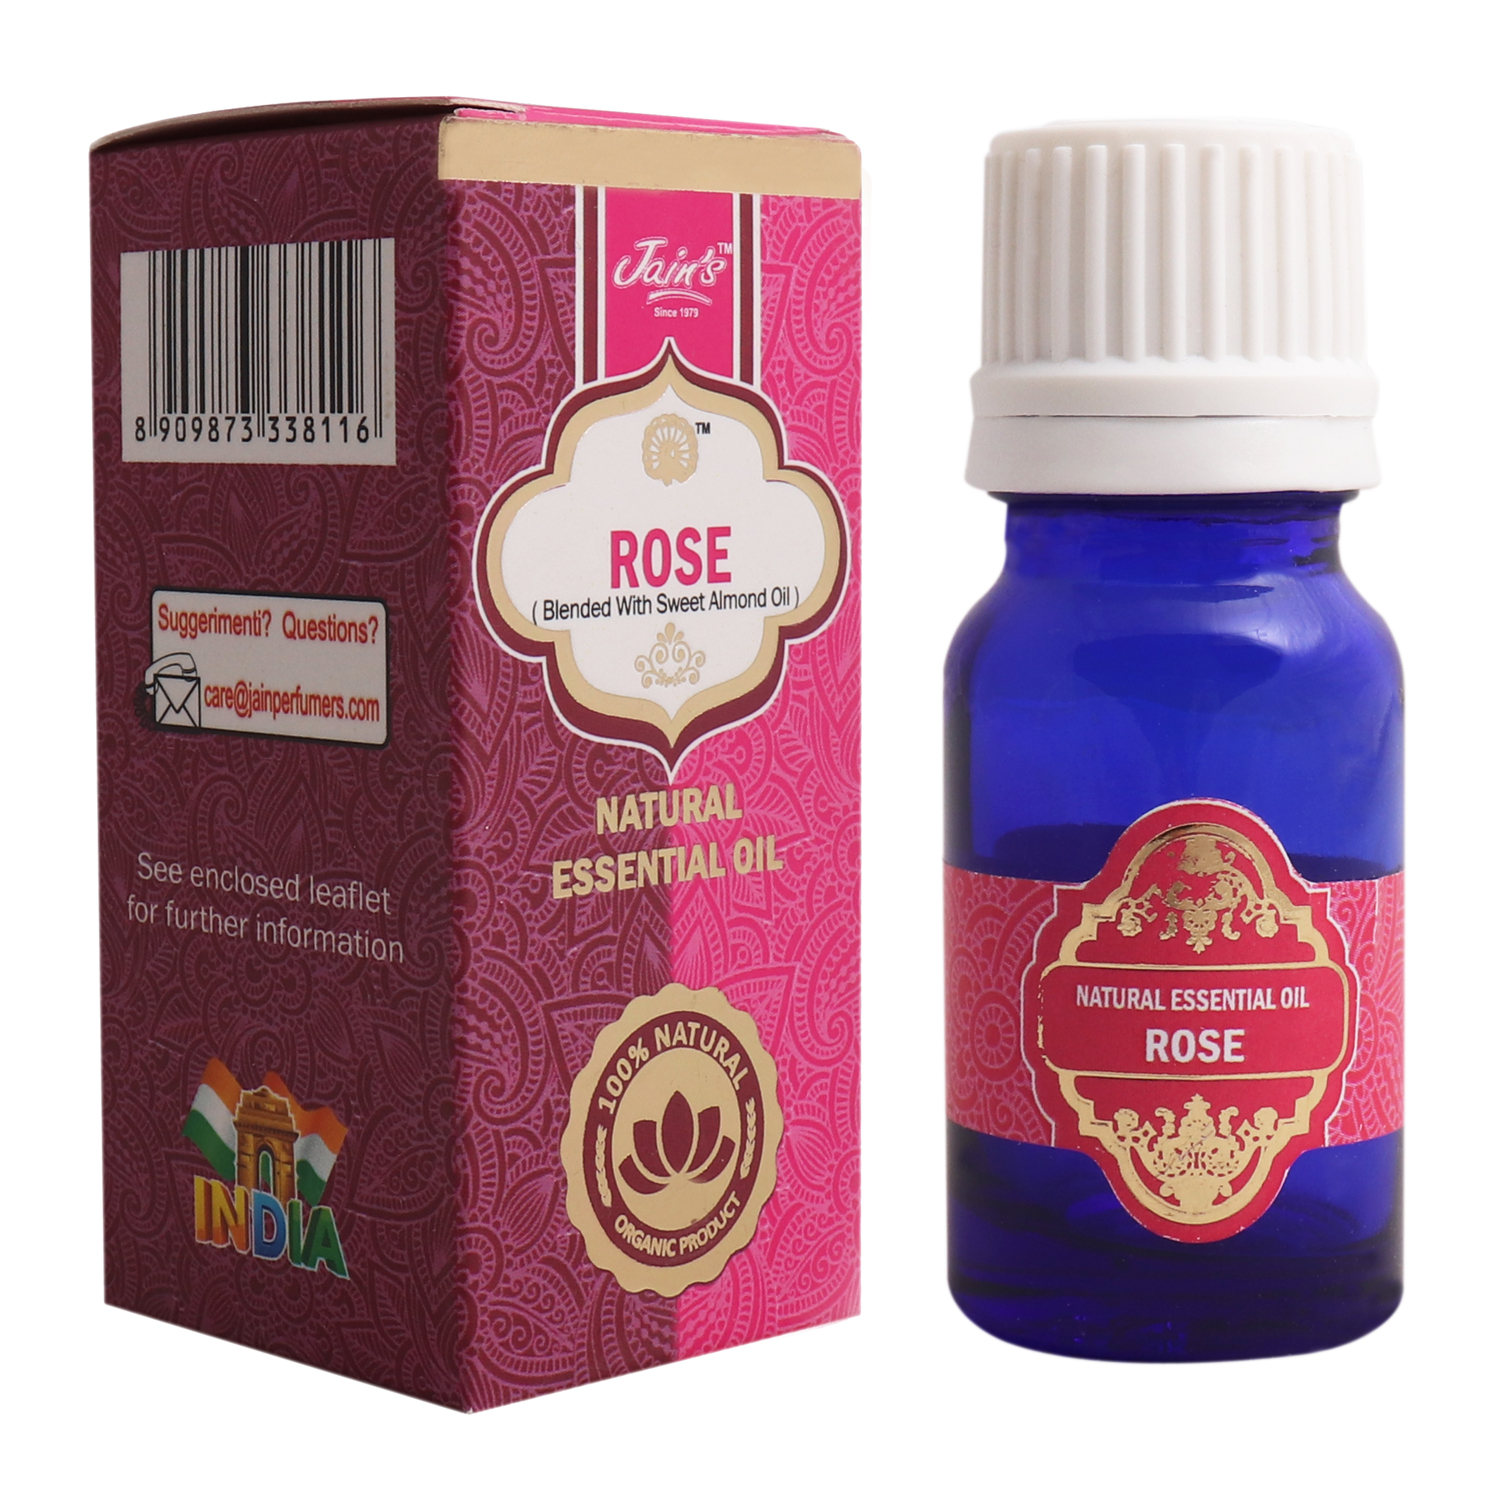 ROSE (BLENDED WITH SWEET ALMOND) OIL